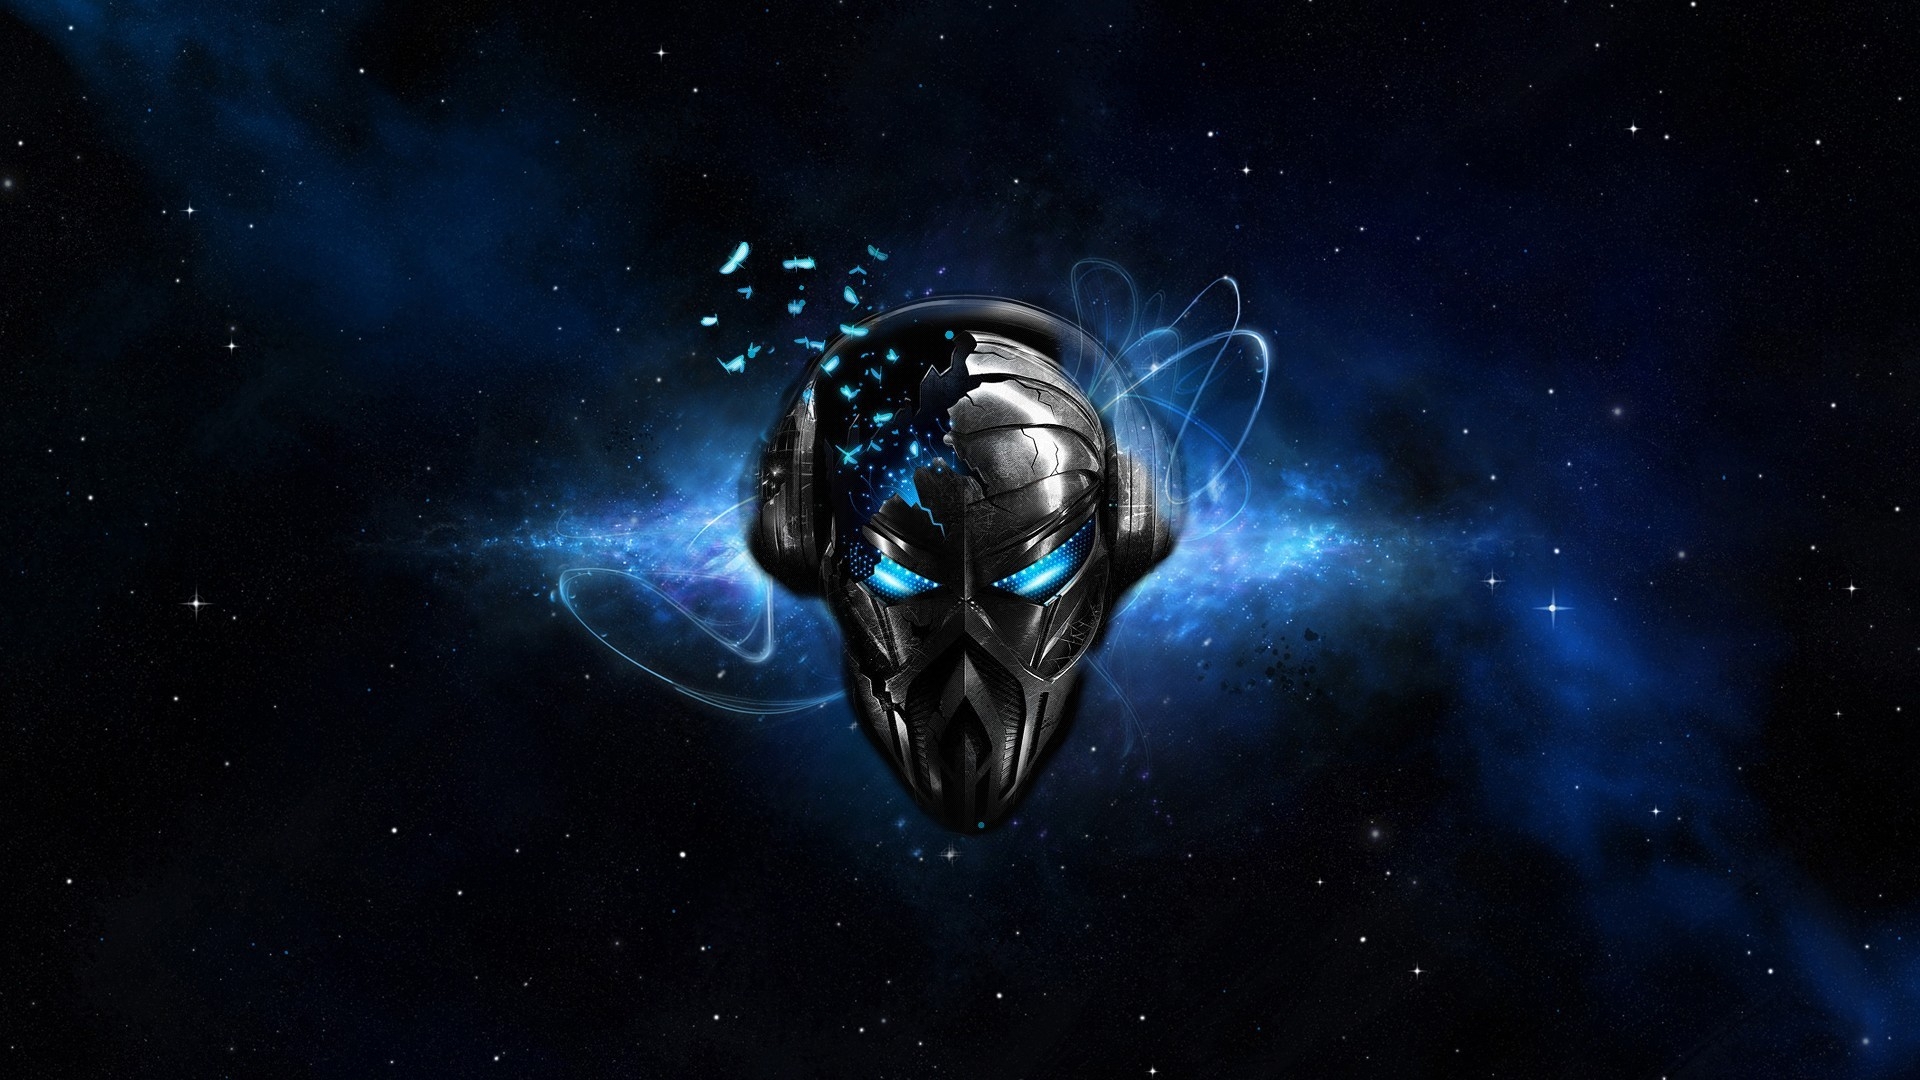 Space Robot Mask for 1920 x 1080 HDTV 1080p resolution